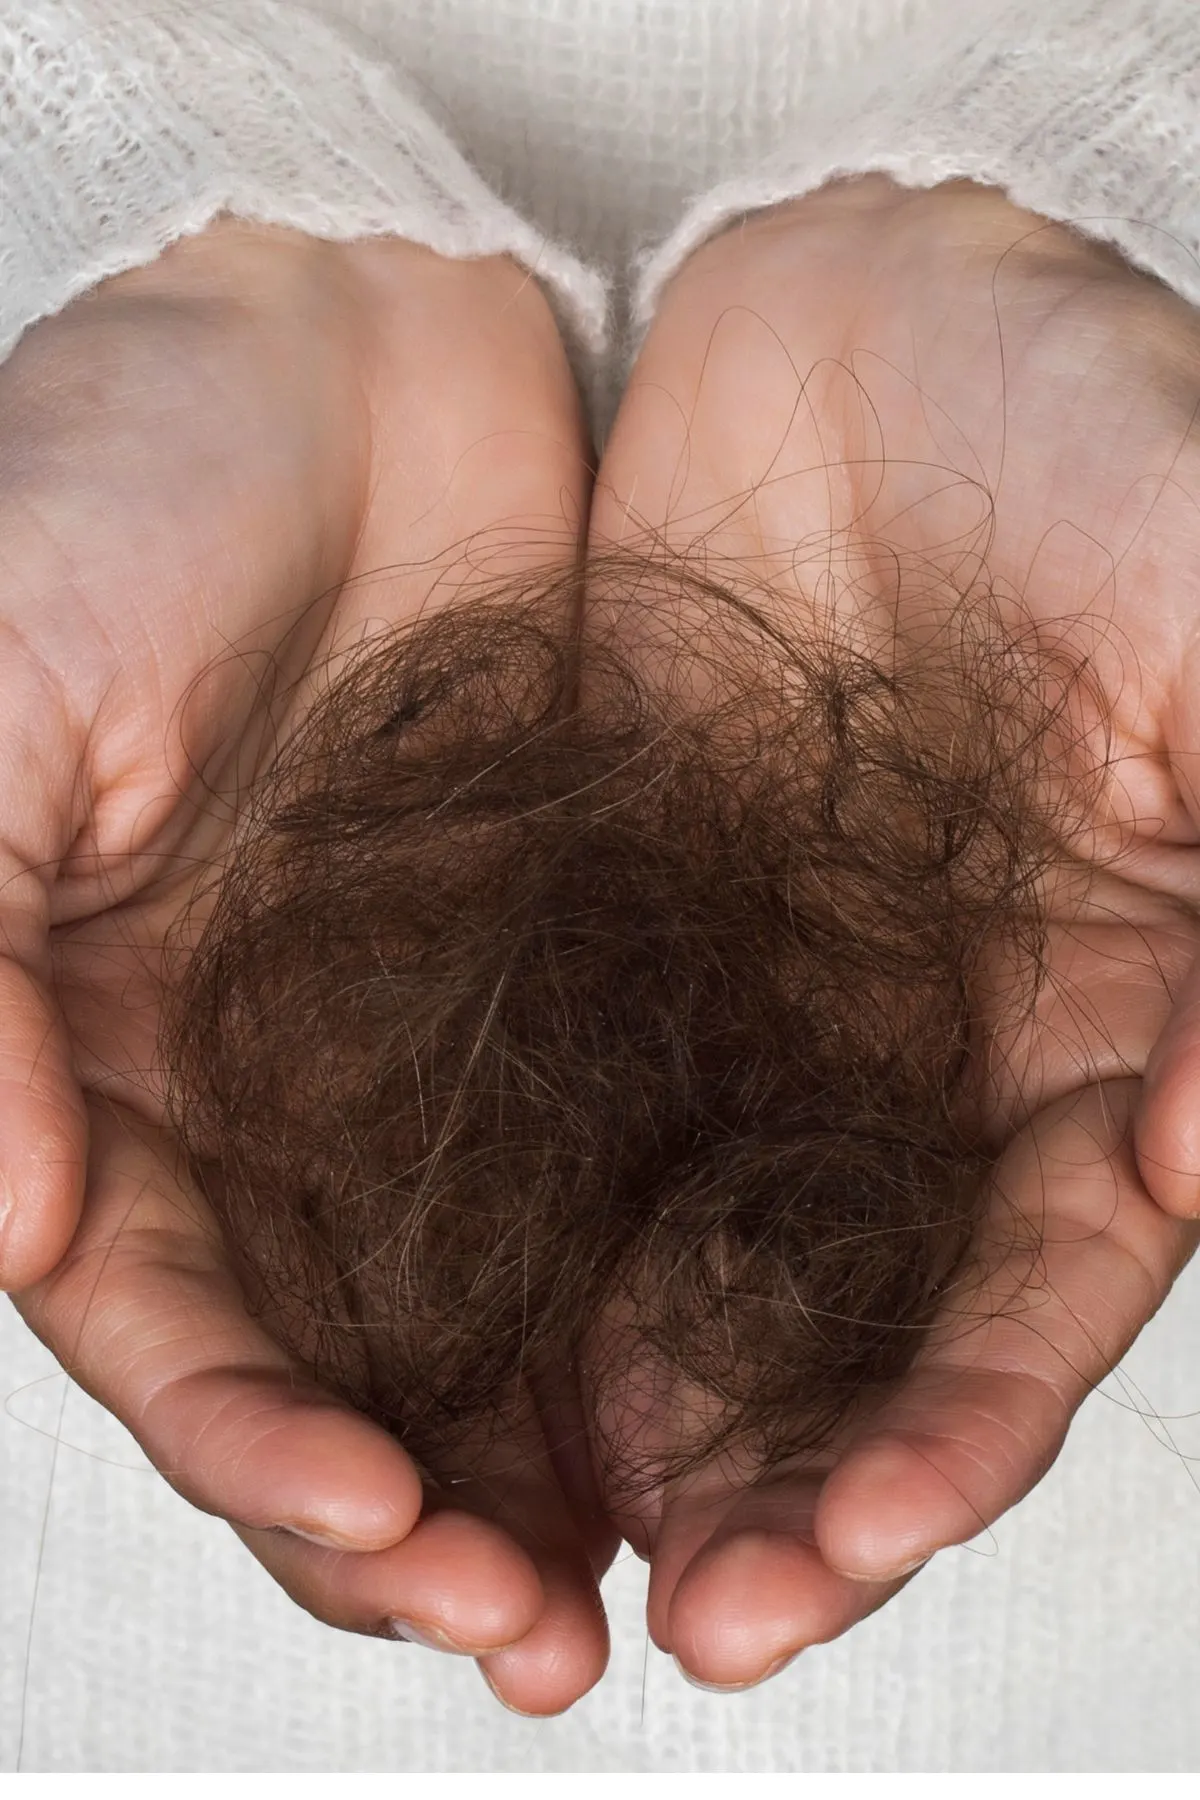 A woman holds out her hands with a ball of hair that has shed from her scalp.